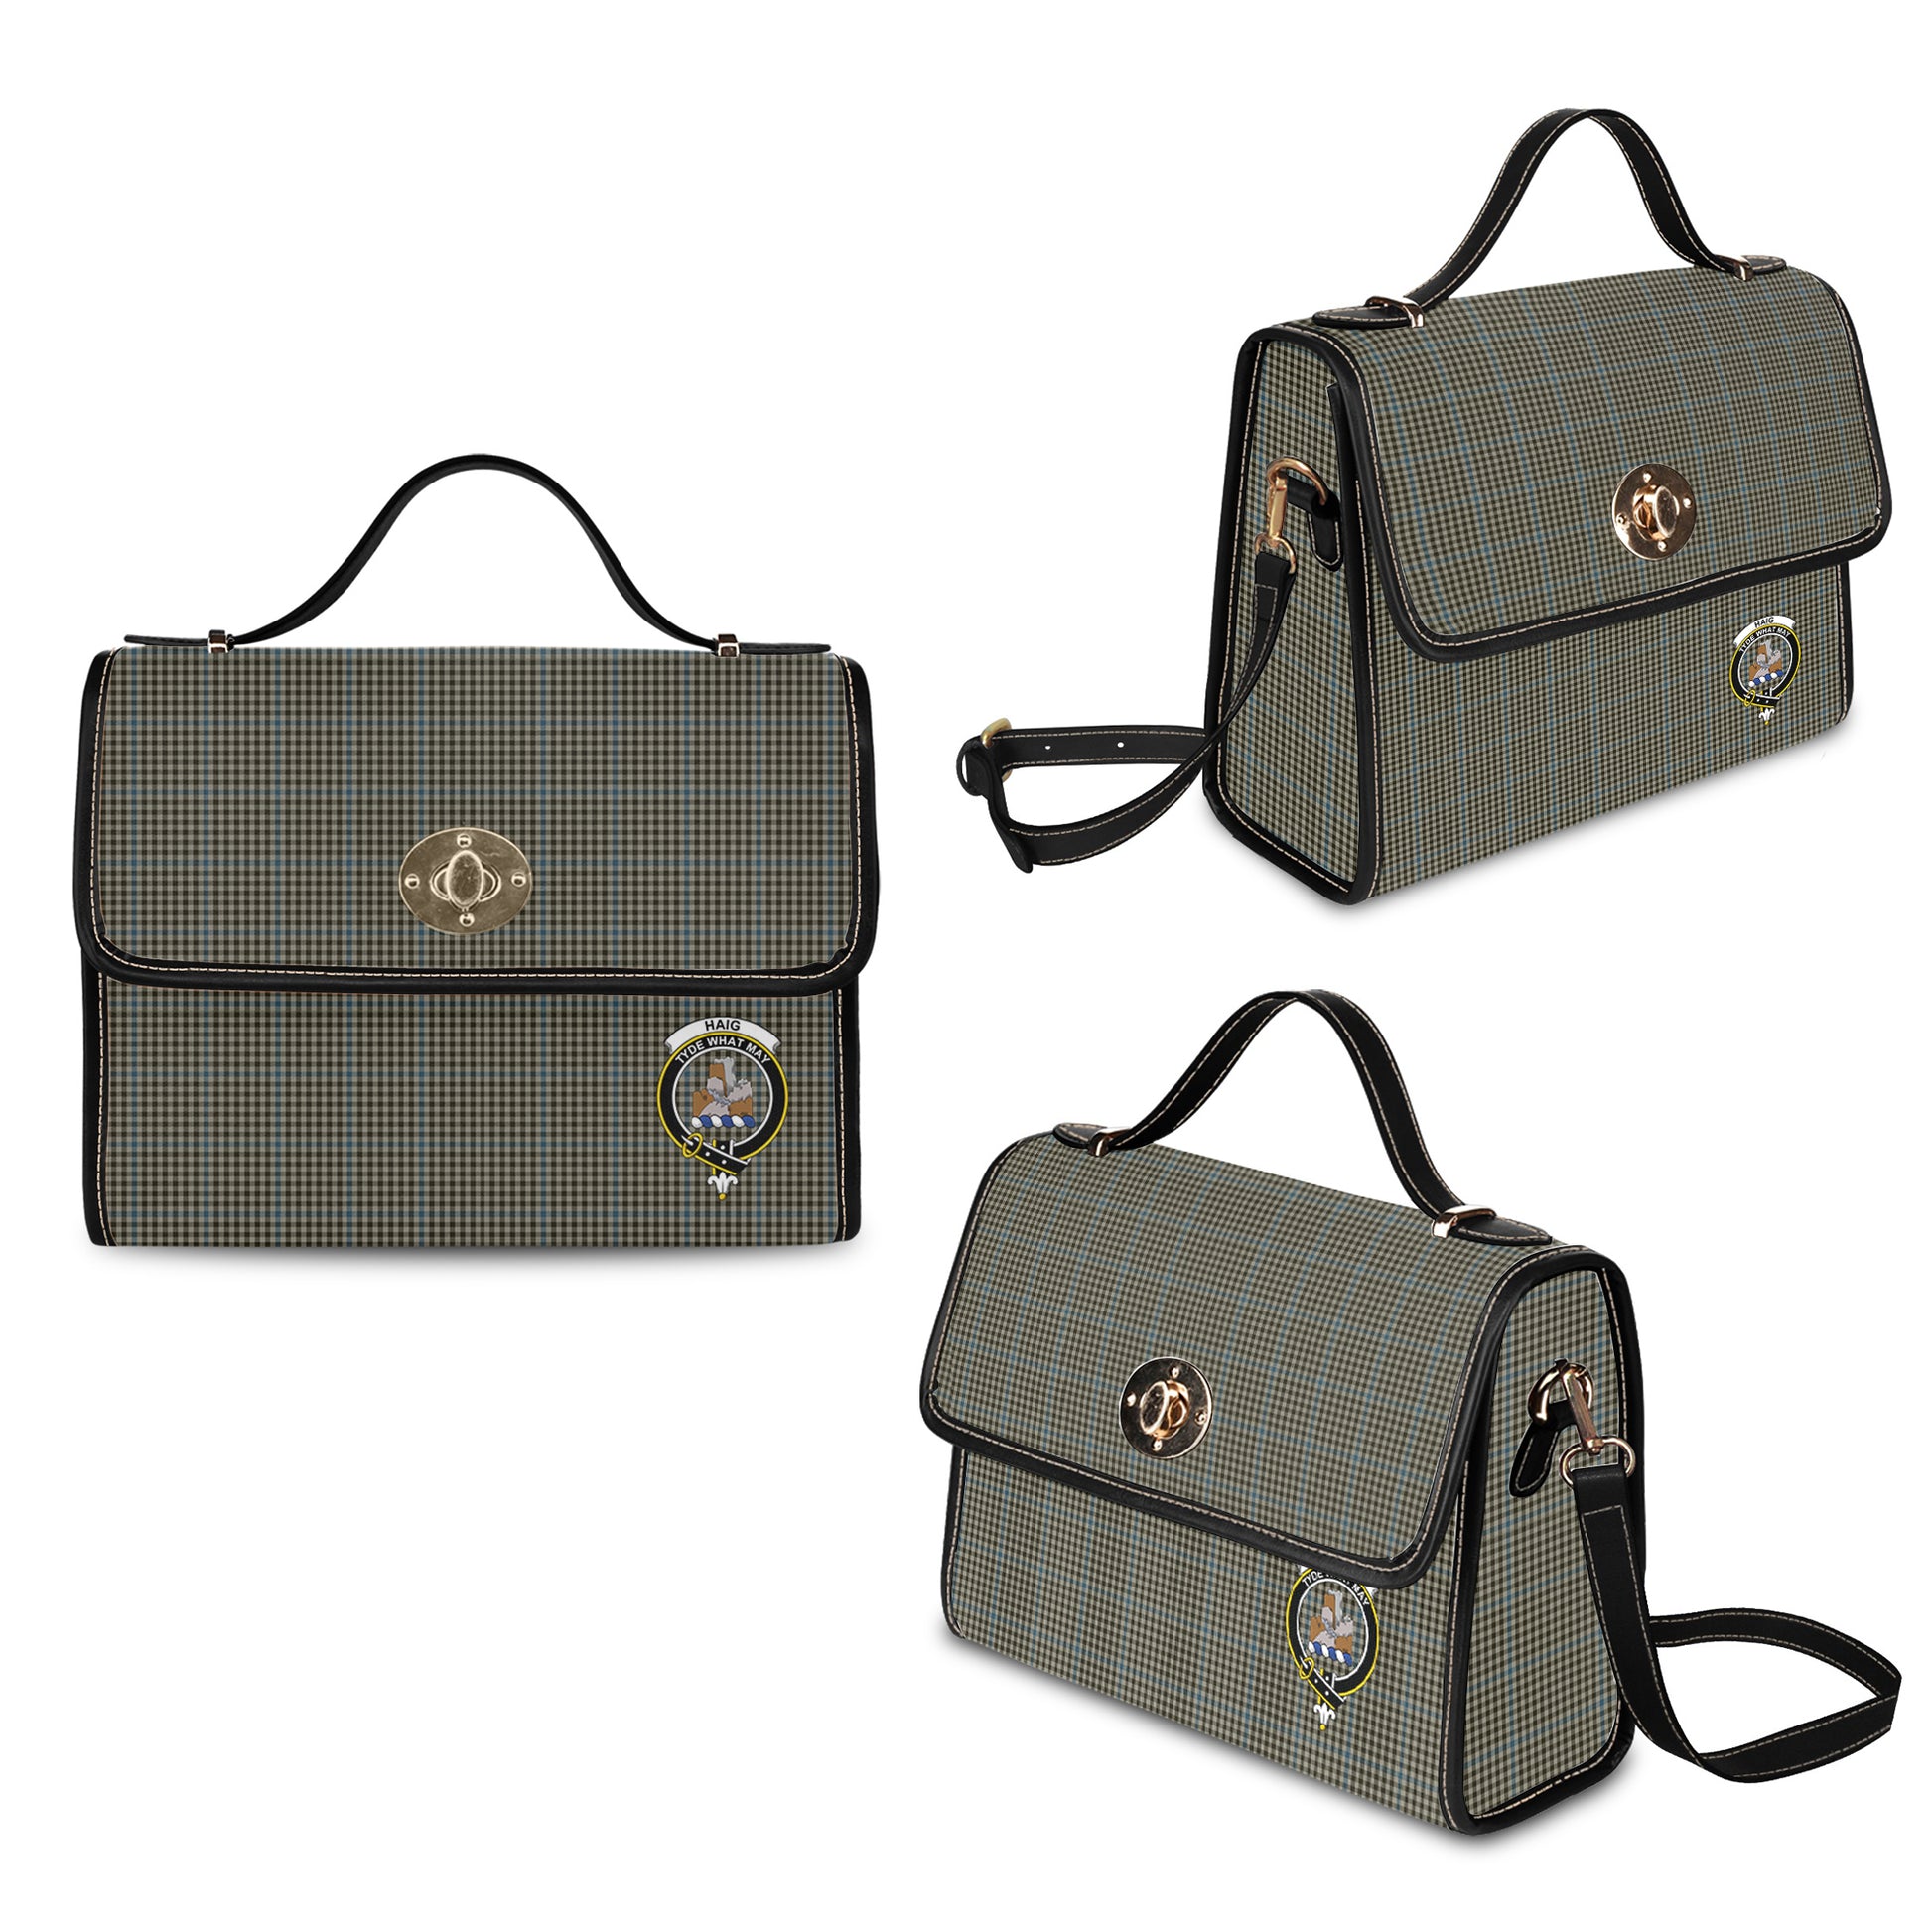 haig-tartan-leather-strap-waterproof-canvas-bag-with-family-crest